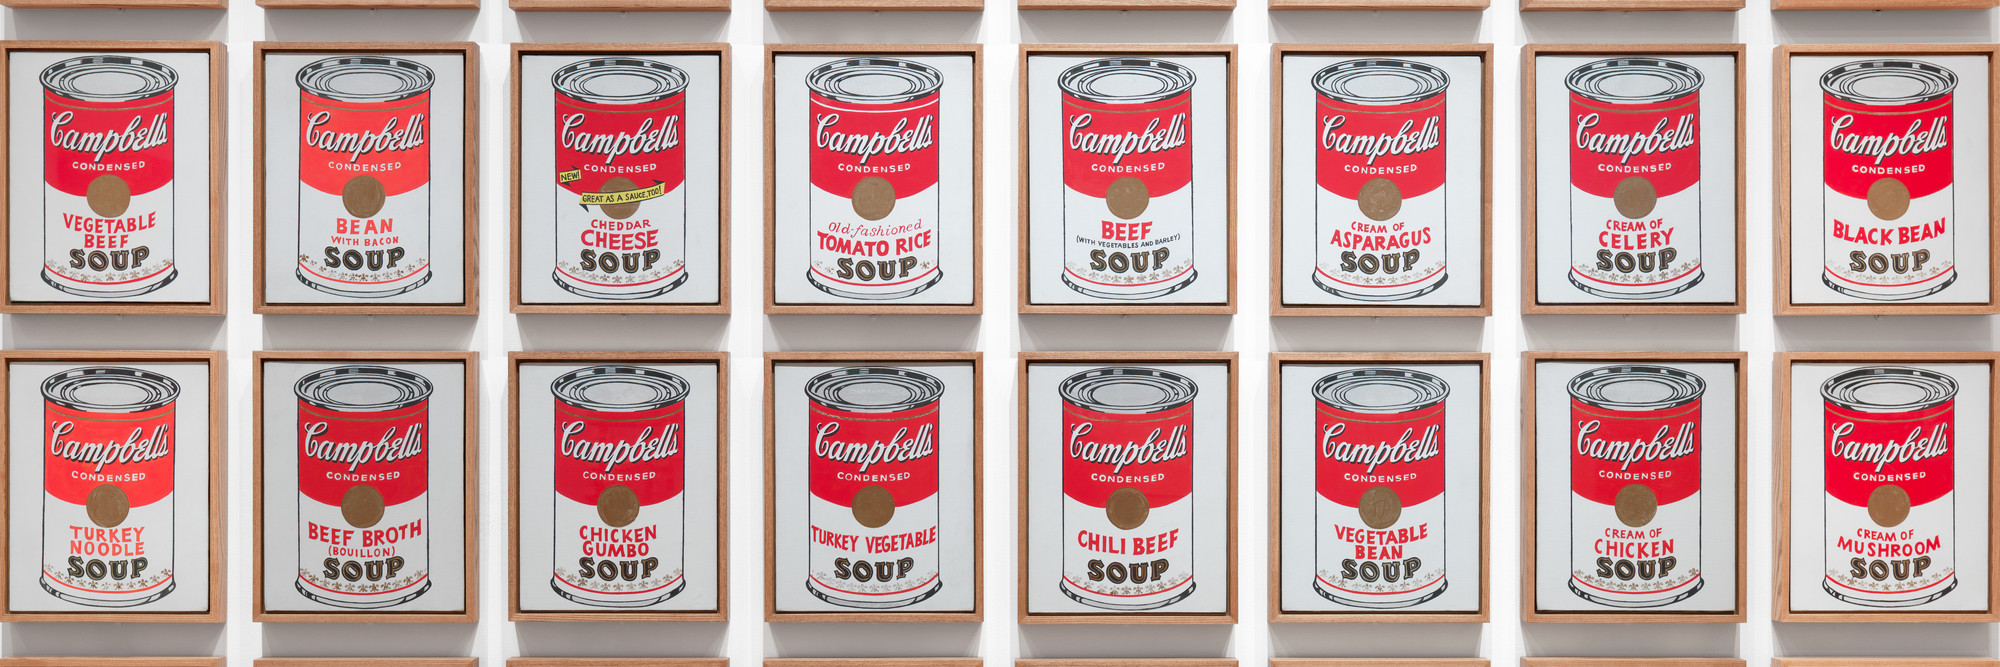 Andy Warhol. Campbell’s Soup Cans. 1962. Acrylic with metallic enamel paint on canvas, 32 panels, each canvas 20 × 16&#34; (50.8 × 40.6 cm); overall installation with 3&#34; between each panel is 97&#34; high × 163&#34; wide. Partial gift of Irving Blum Additional funding provided by Nelson A. Rockefeller Bequest, gift of Mr. and Mrs. William A. M. Burden, Abby Aldrich Rockefeller Fund, gift of Nina and Gordon Bunshaft, acquired through the Lillie P. Bliss Bequest, Philip Johnson Fund, Frances R. Keech Bequest, gift of Mrs. Bliss Parkinson, and Florence B. Wesley Bequest (all by exchange). © 2019 Andy Warhol Foundation/ARS, NY/TM Licensed by Campbell&#39;s Soup Co. All rights reserved